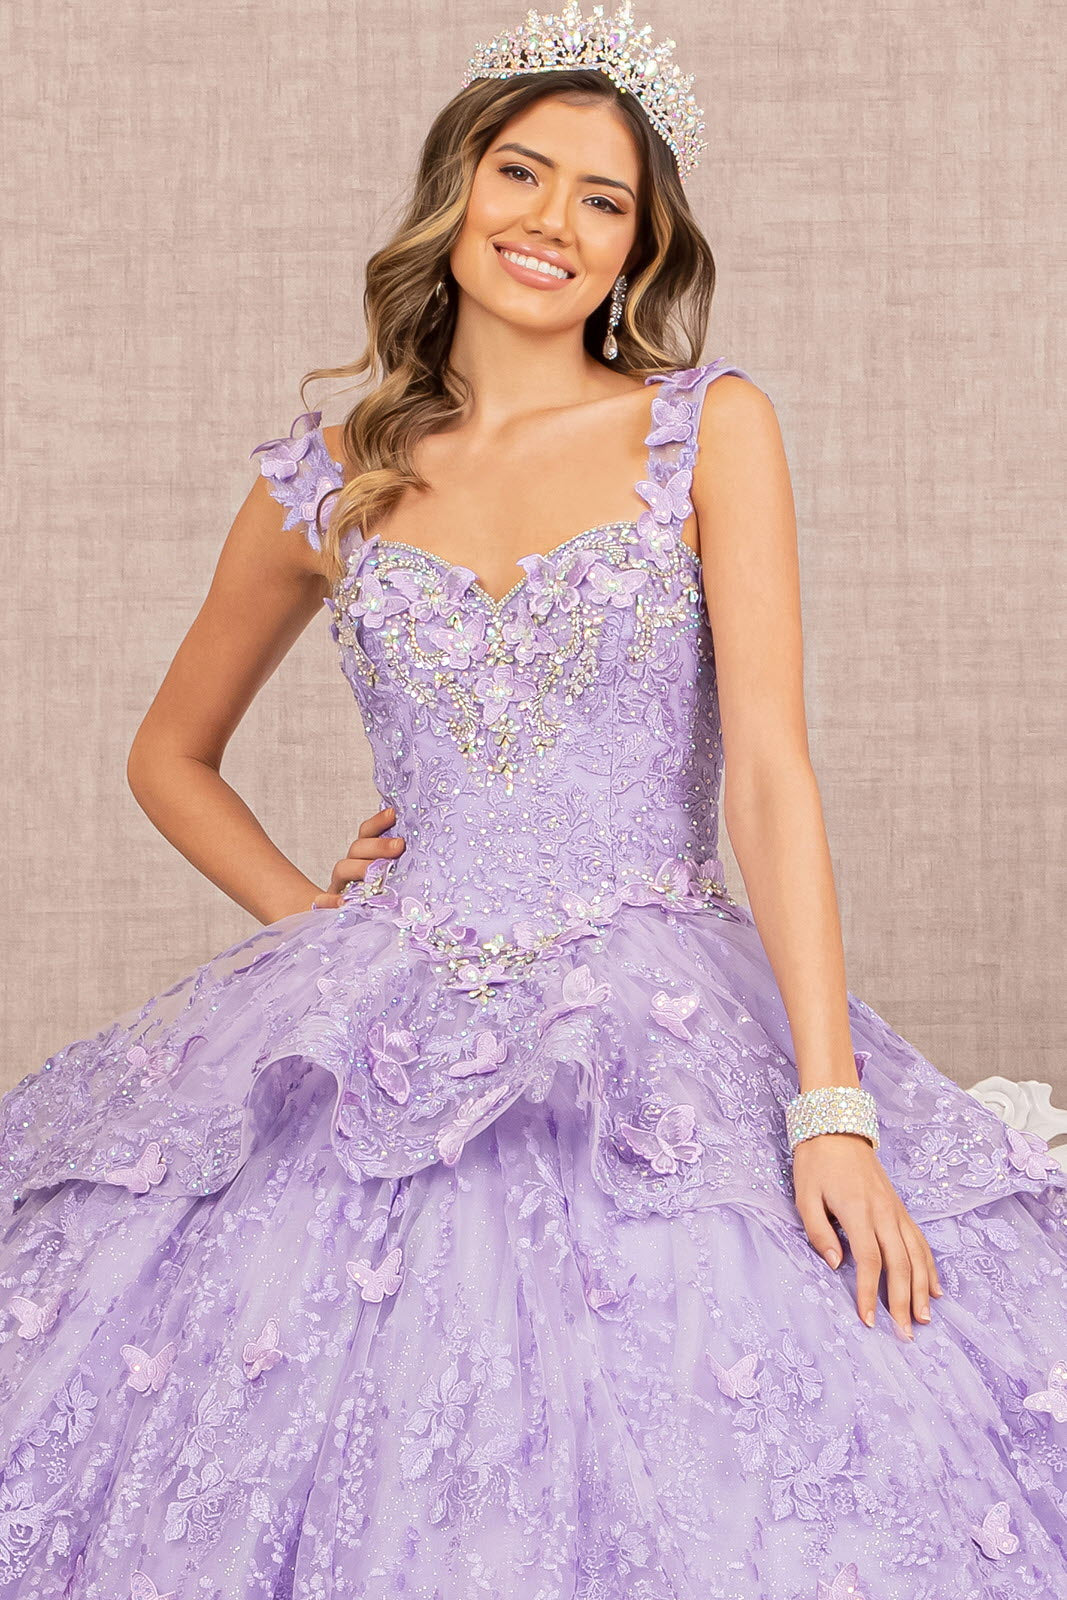 Jewel 3-D Butterfly Applique Off Shoulder Mesh Quinceanera Gown GLGL3112 Elsy Style QUINCEANERA